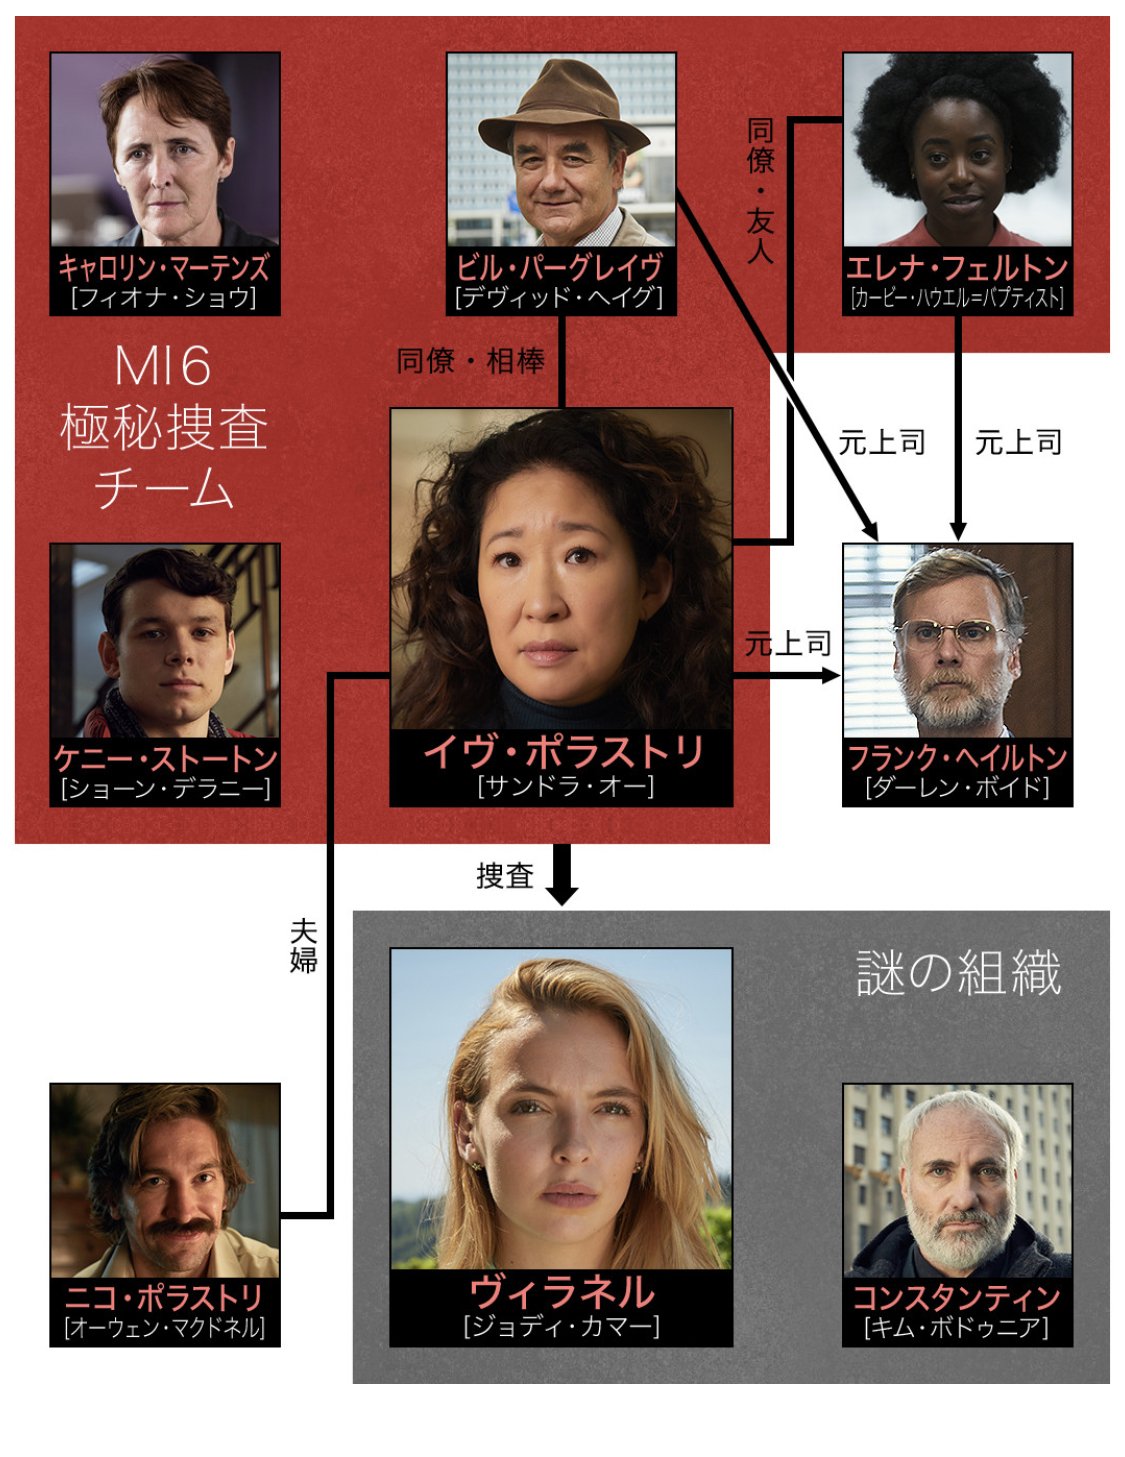 Vic Killing Eve Season 1 Is Going To Air In Japan At 6 2 19 It S Season 1 But Still When It S Going To Air In Taiwan T Co Pnrbnnfxta Killingeve キリング イヴ